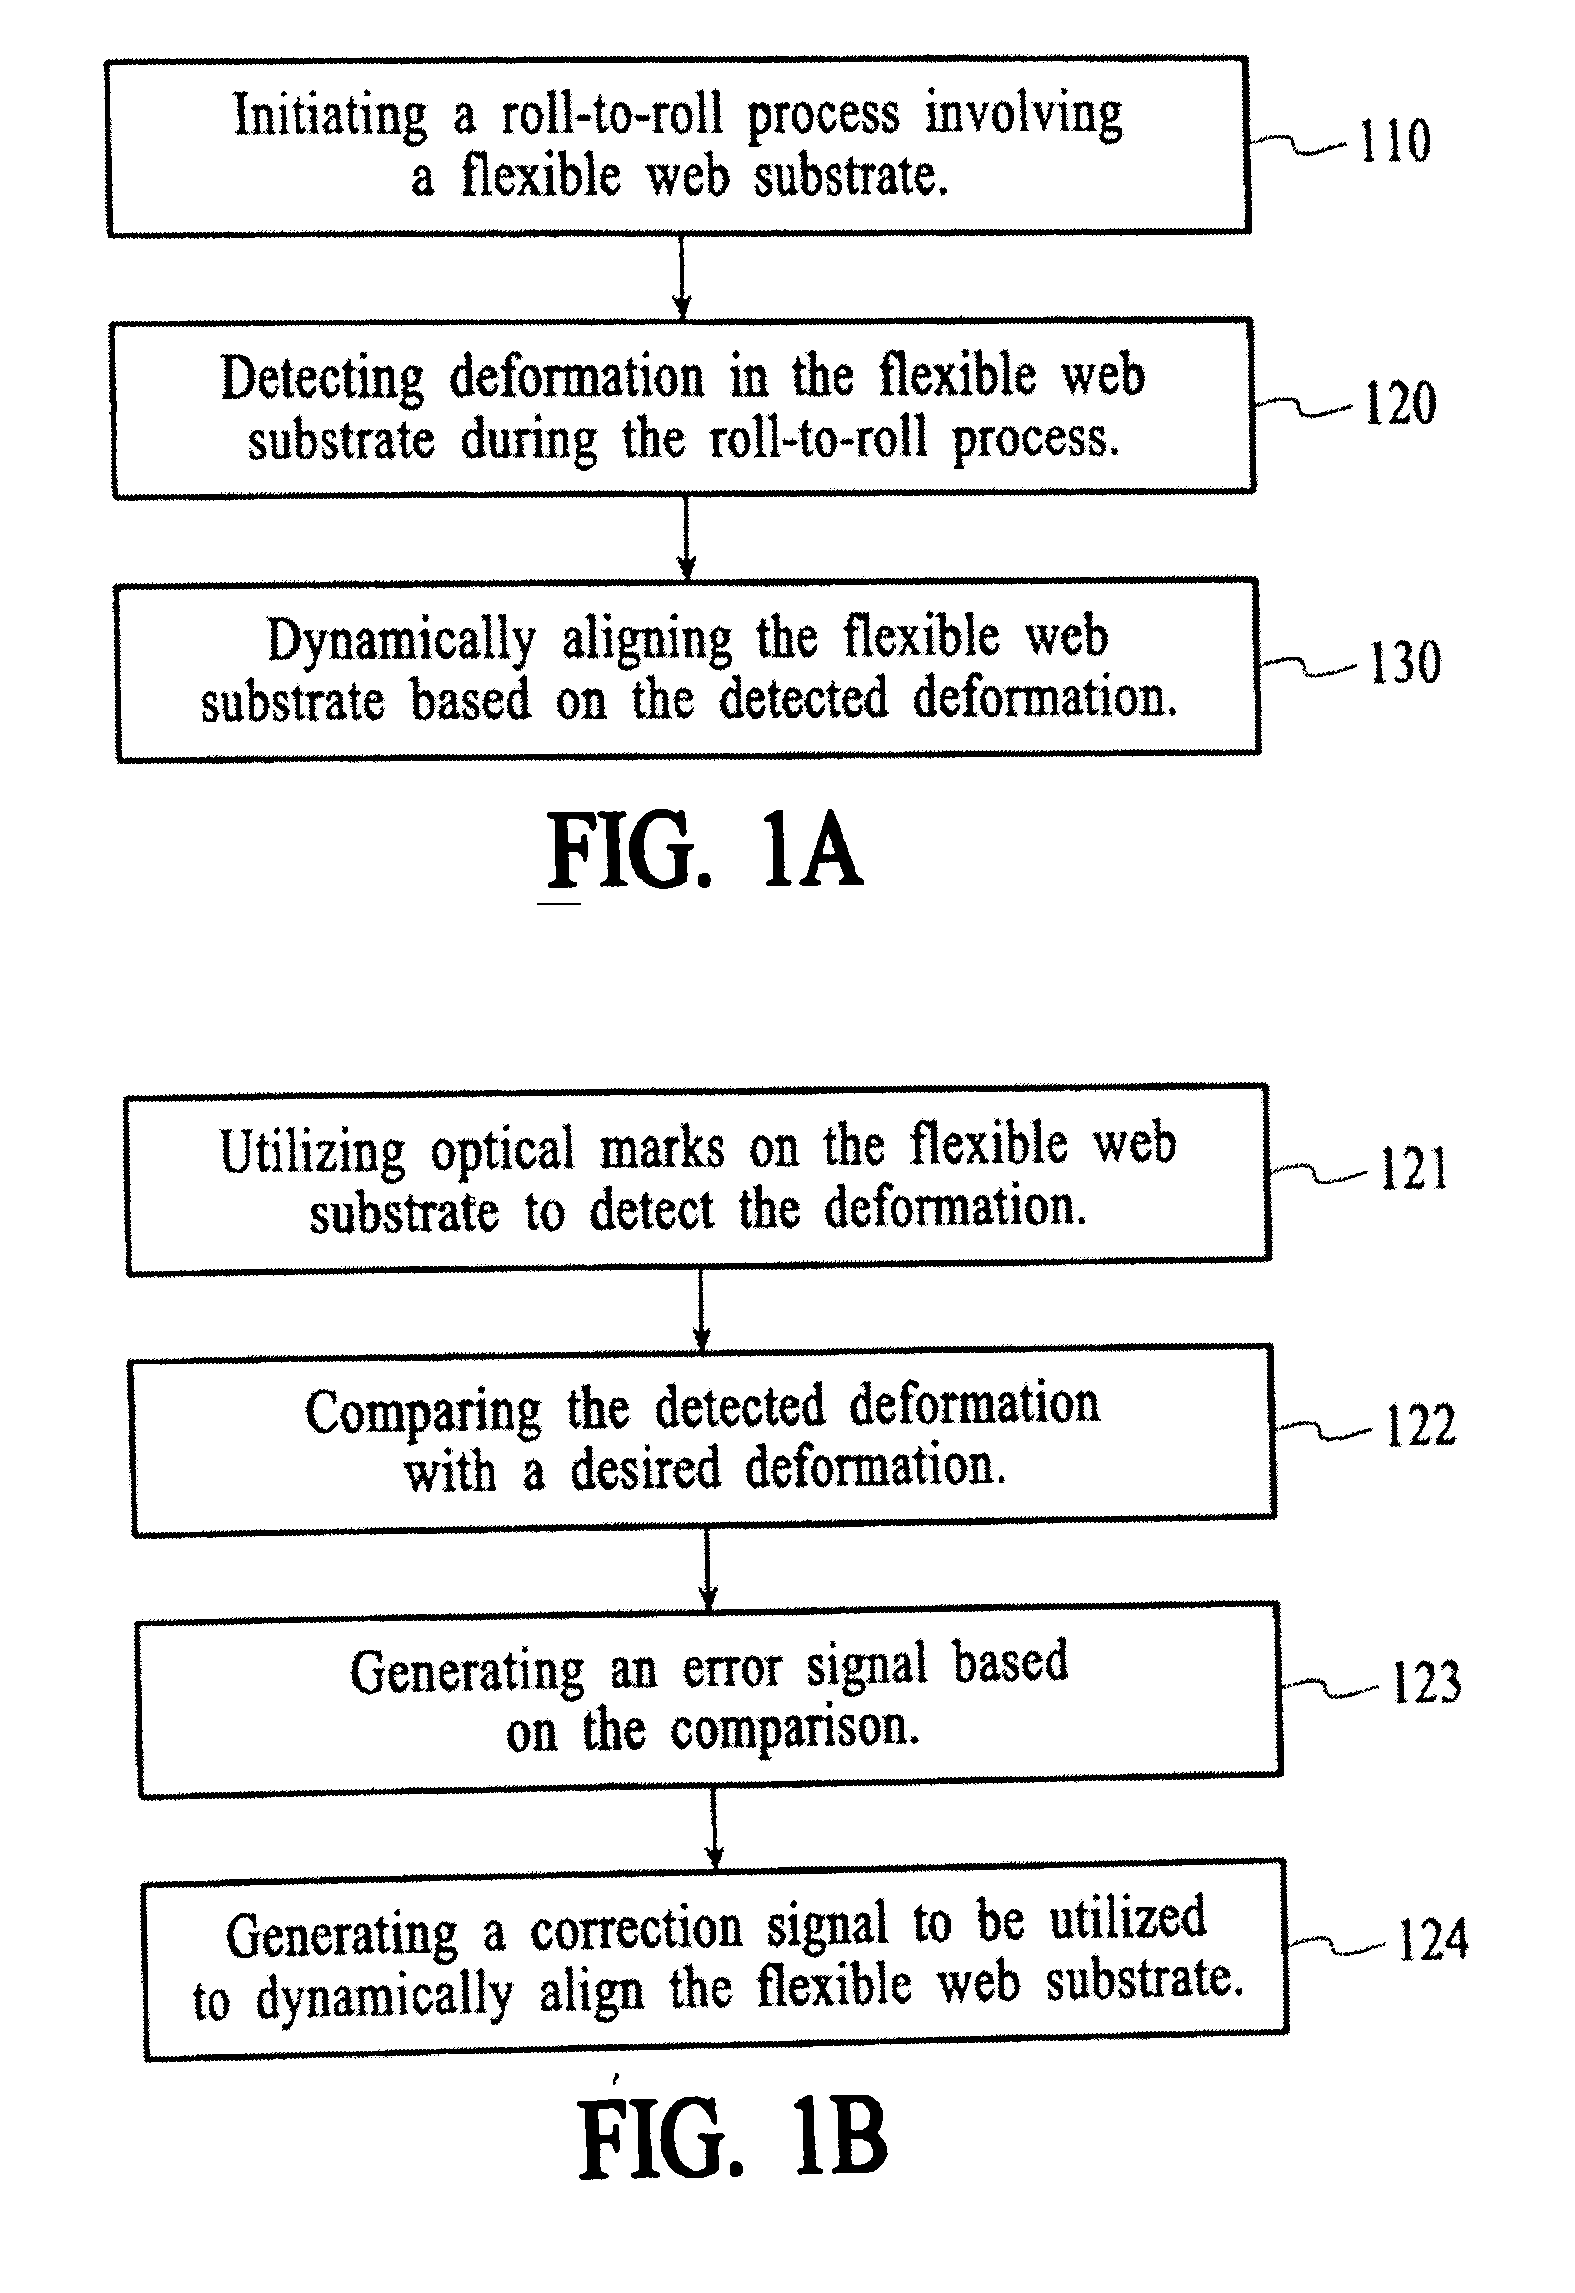 Method and system for correcting web deformation during a roll-to-roll process